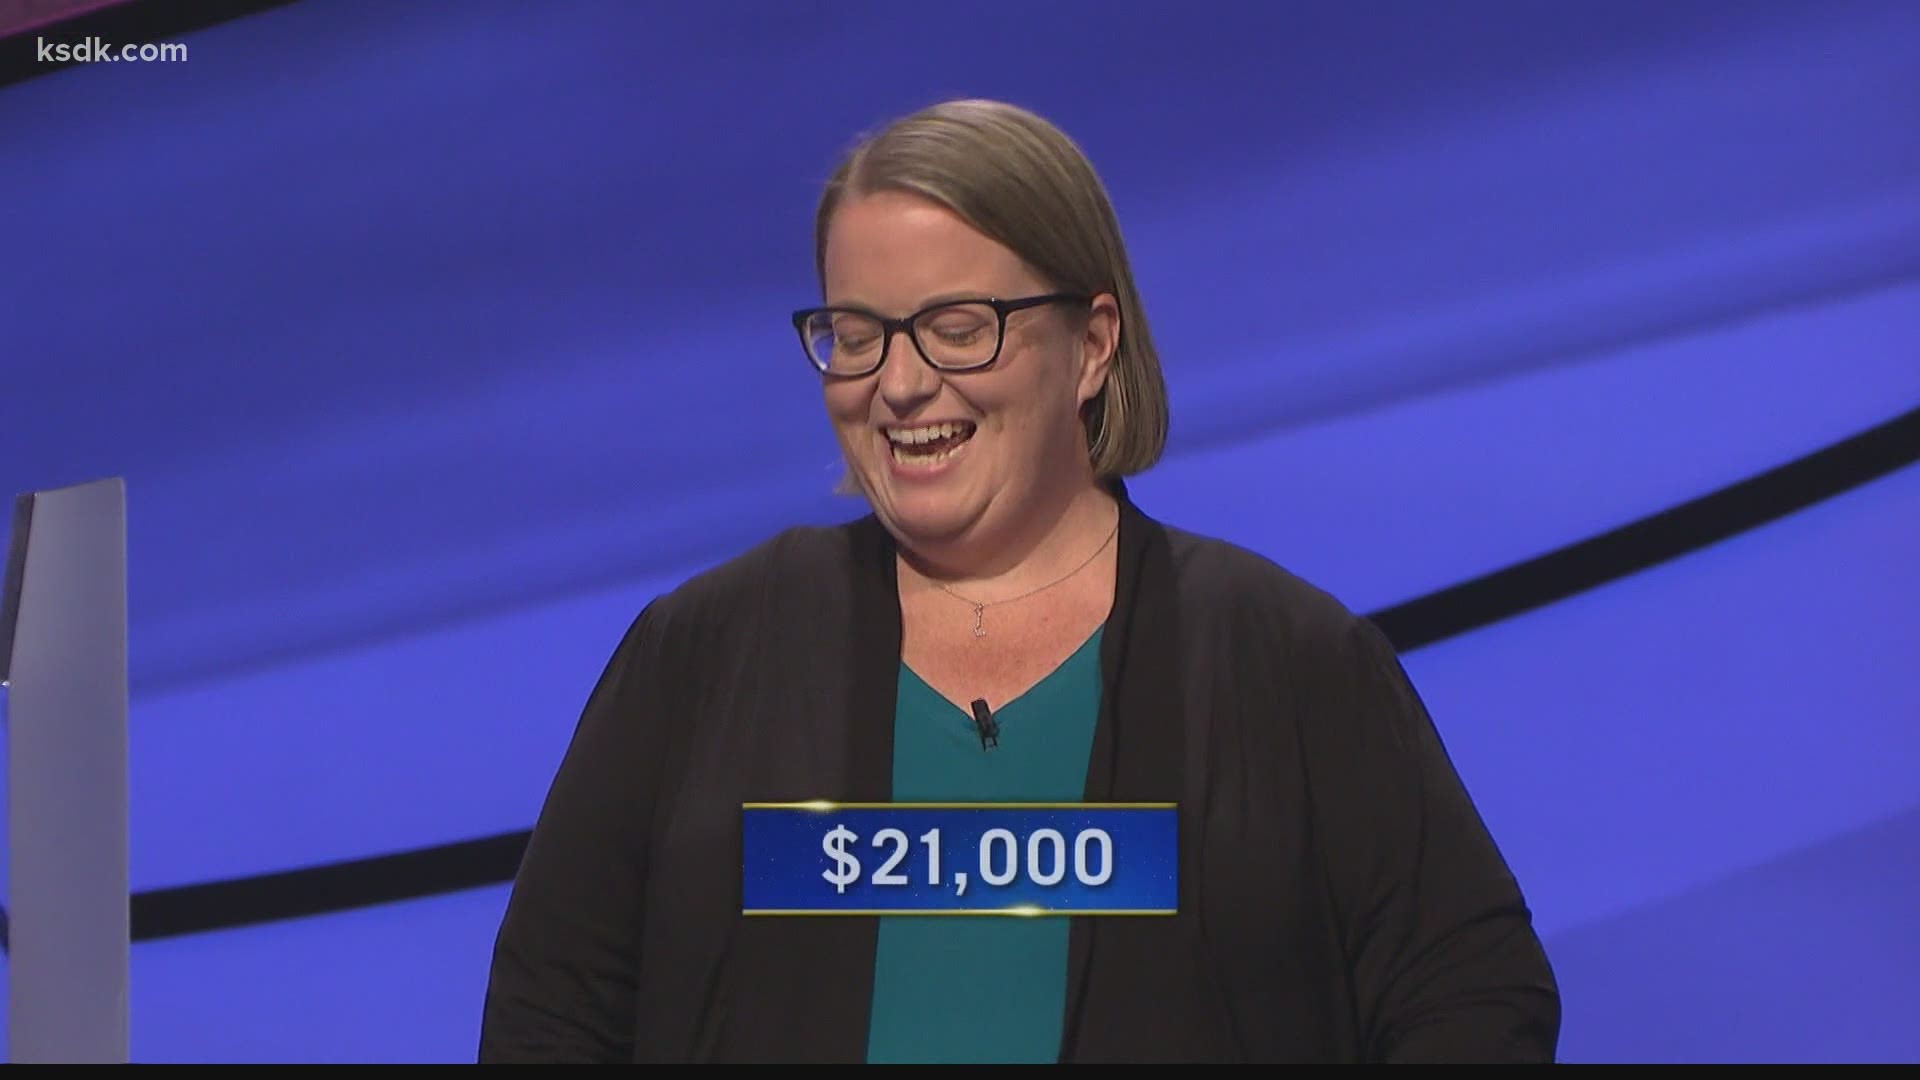 Lindbergh High School teacher Sandy Olive claimed $21,000 in her "Jeopardy!" debut Tuesday.